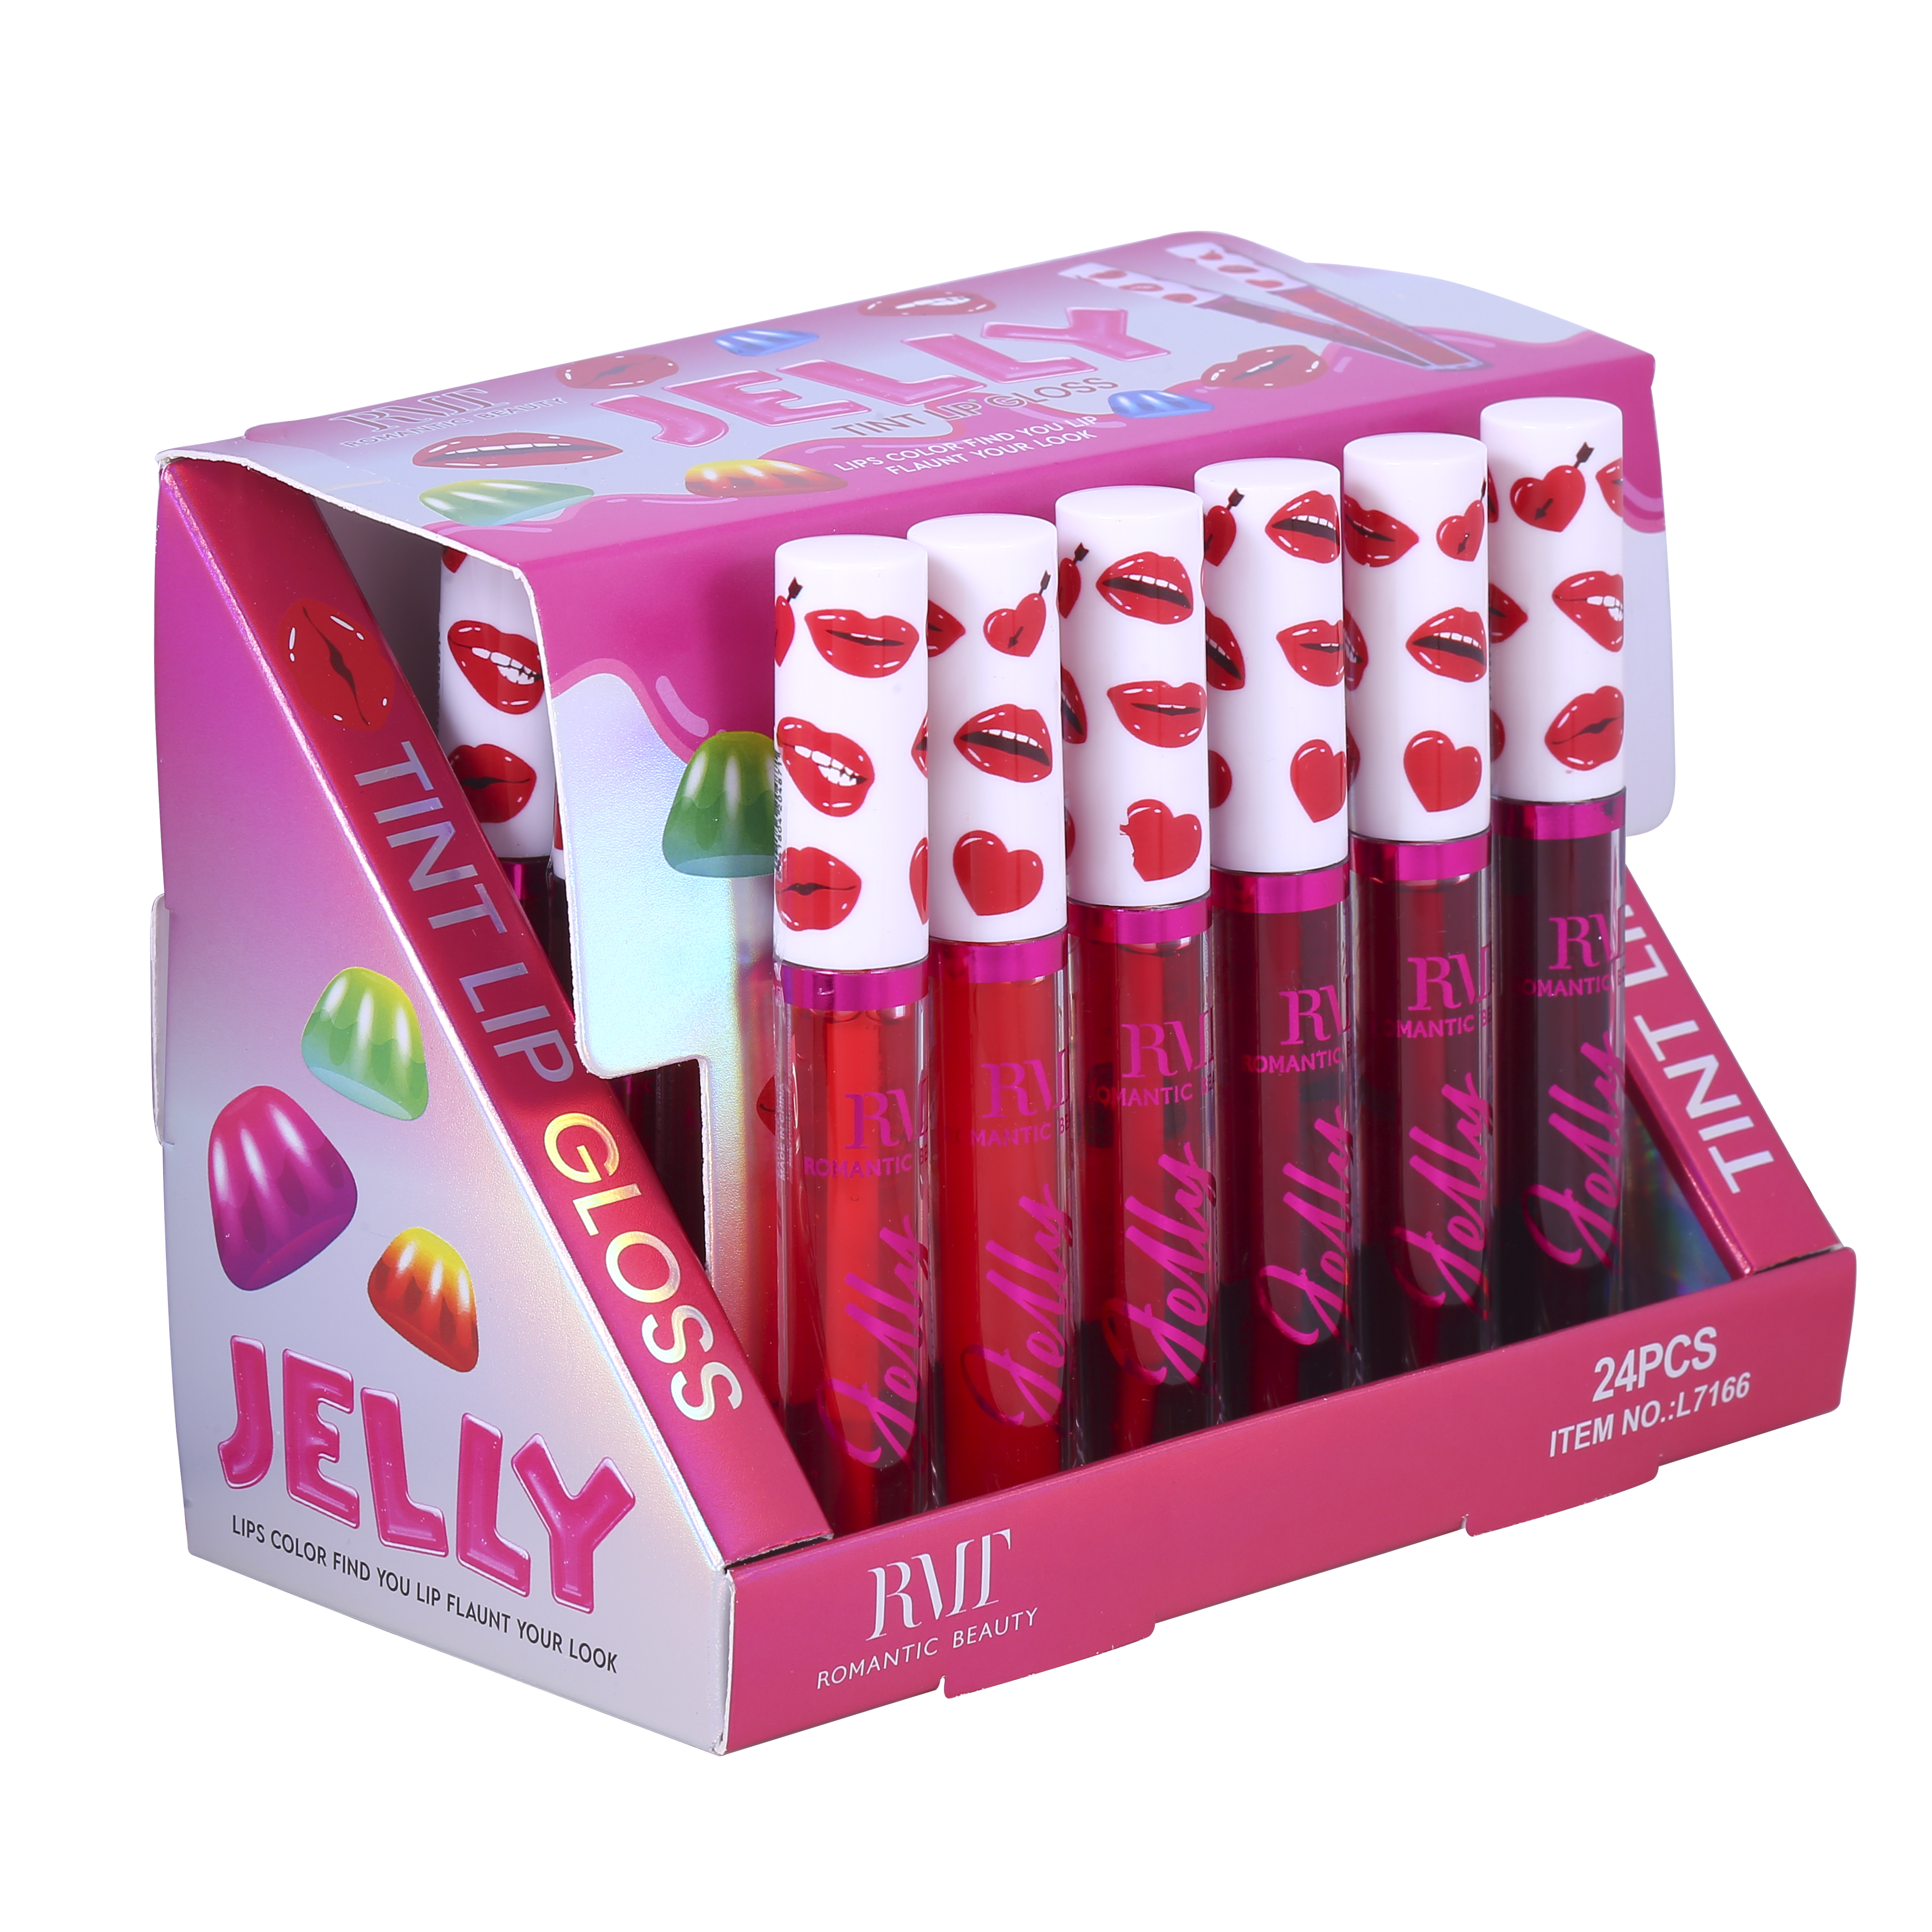 Jelly Tint Lip Stain